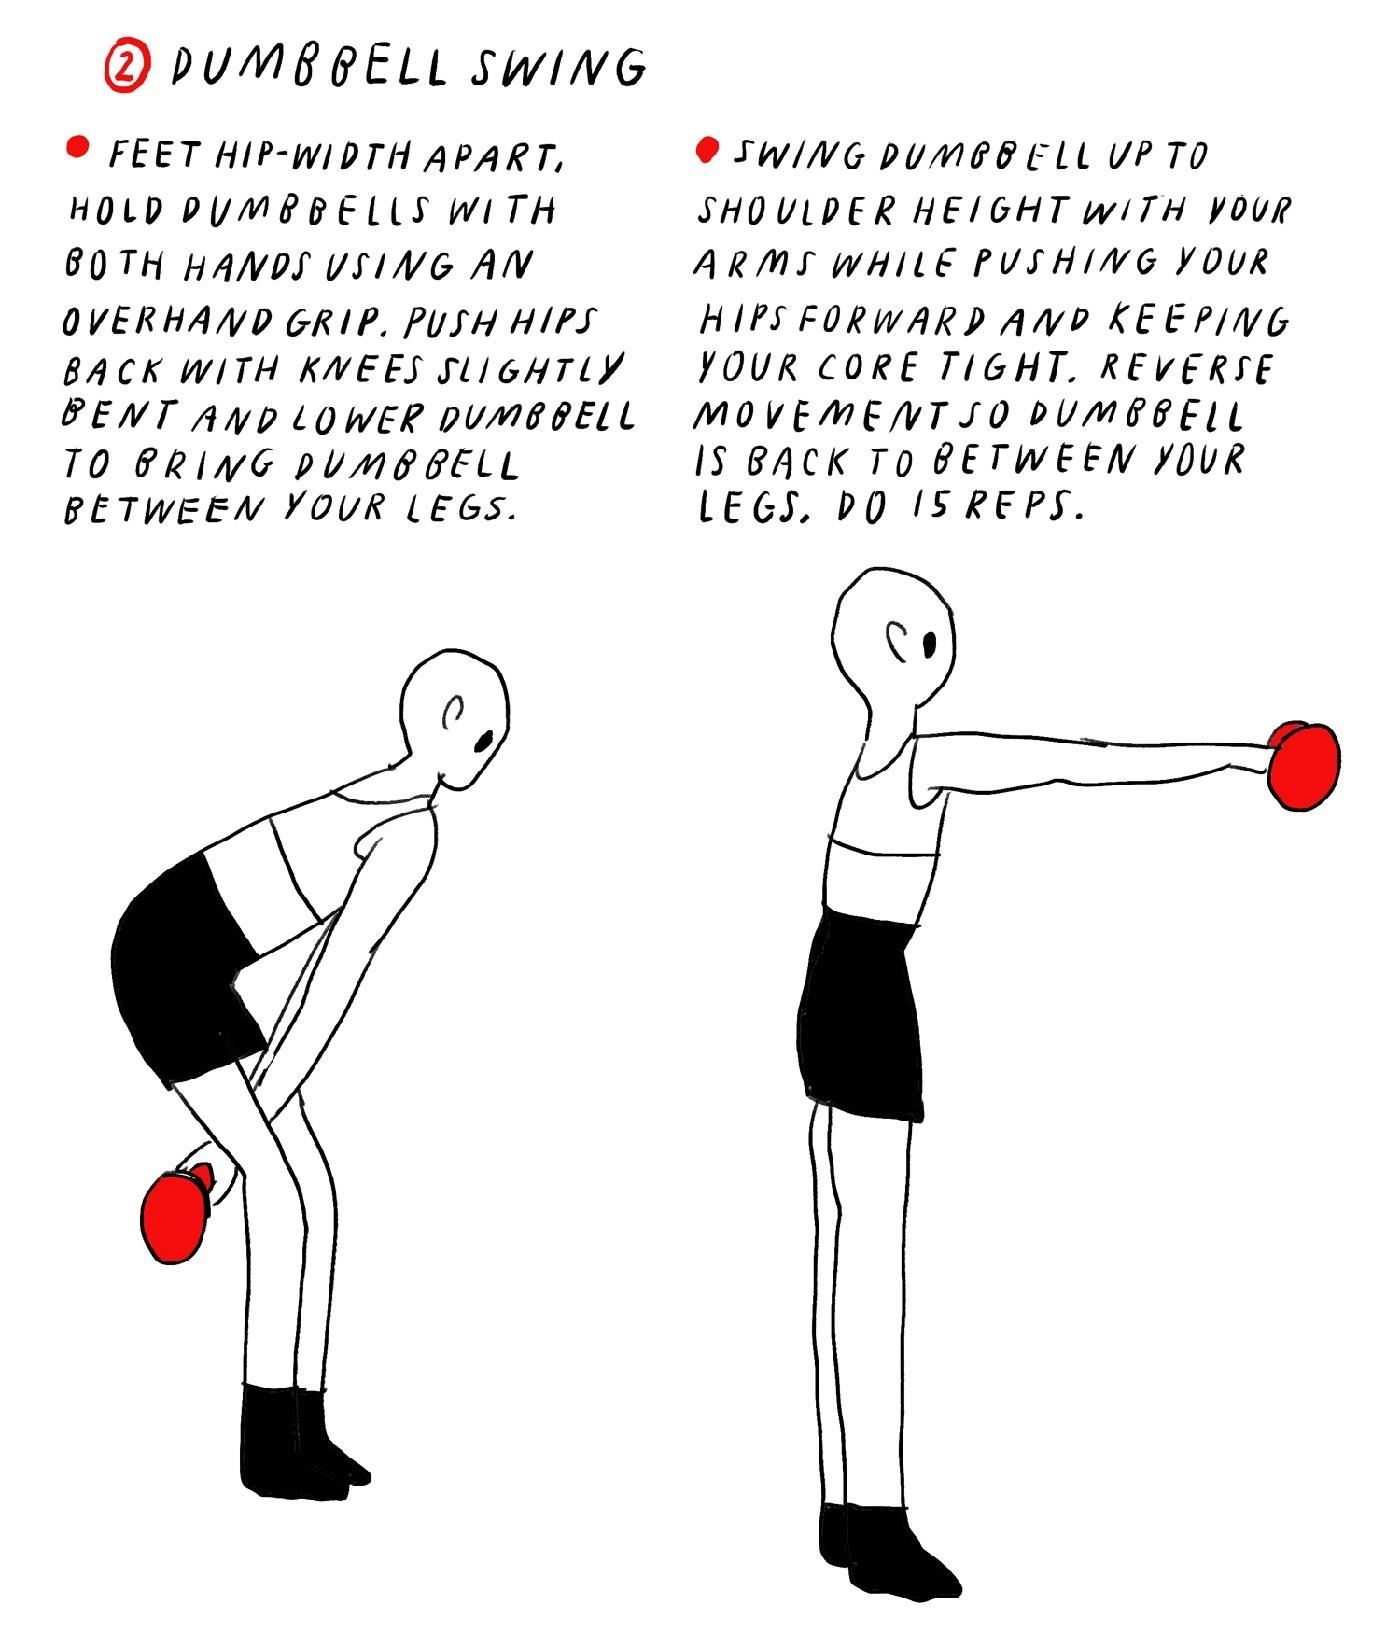 4 Exercises You Can Do at Home Using Only One Dumbbell